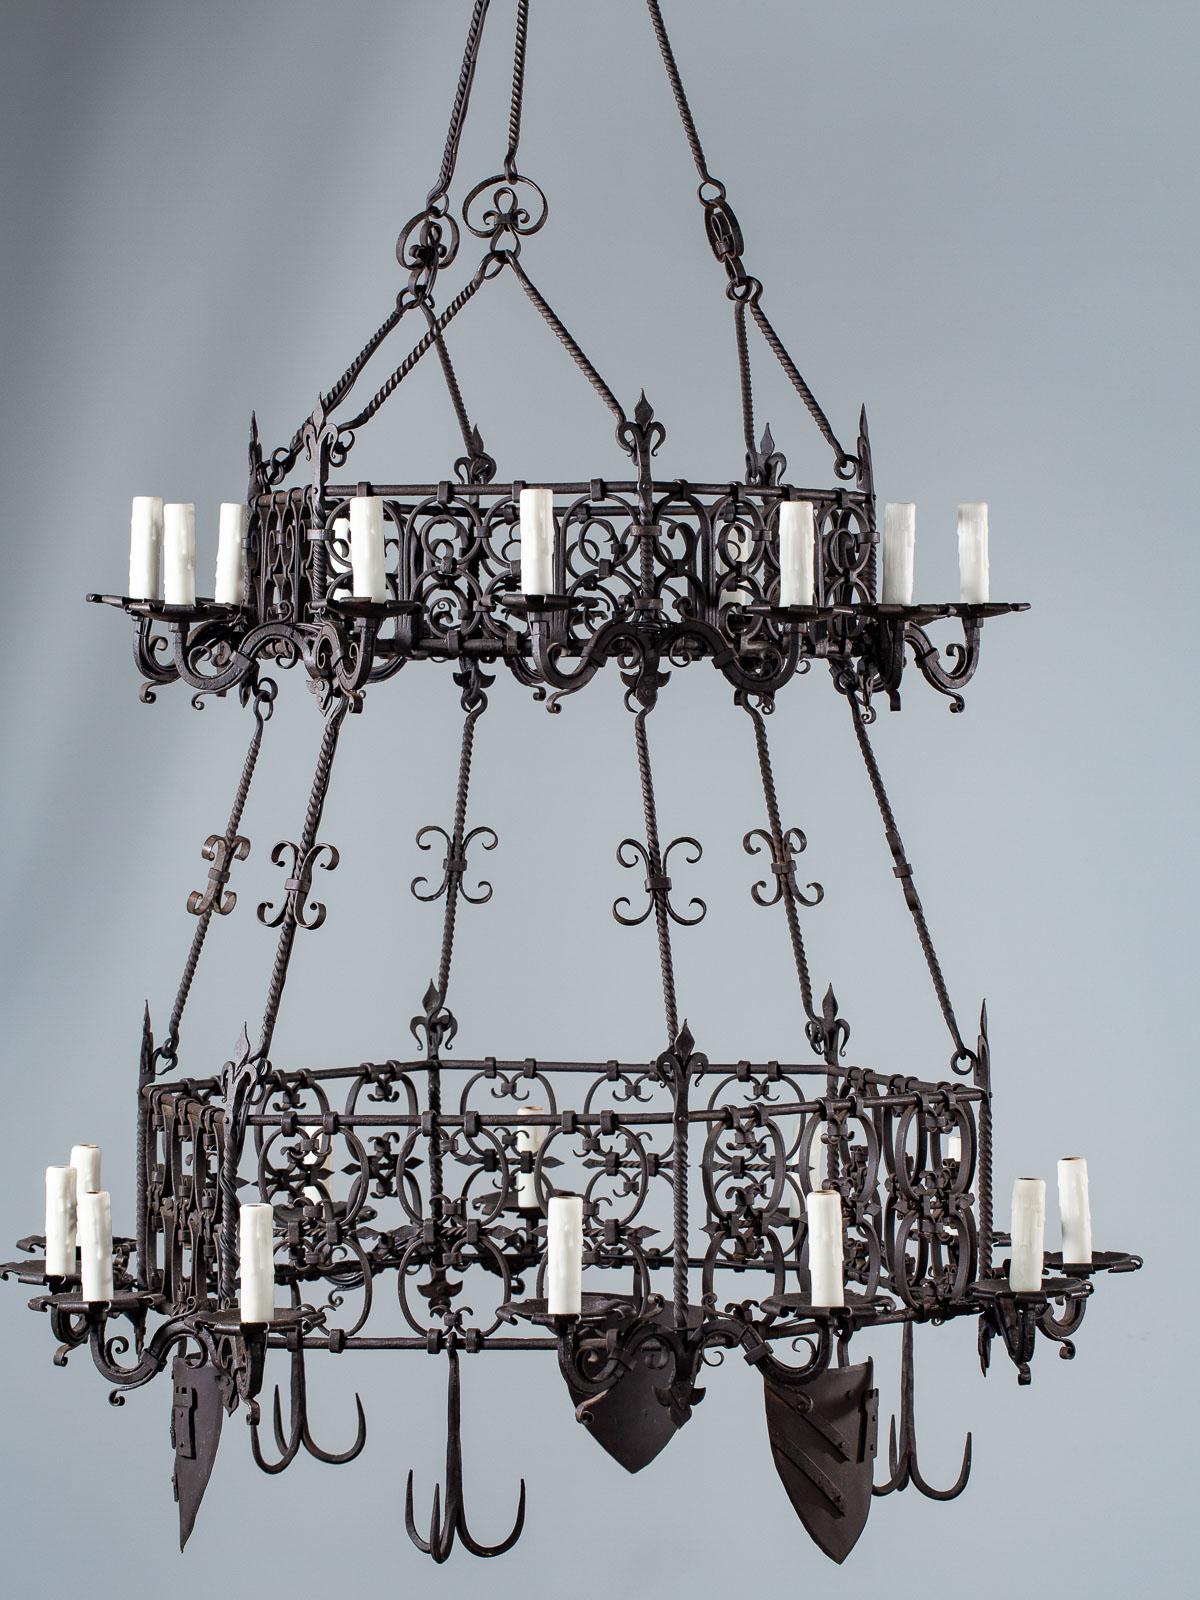 Cast Antique German Two-Tier Forged Iron Chandelier, circa 1880 24 Lights For Sale